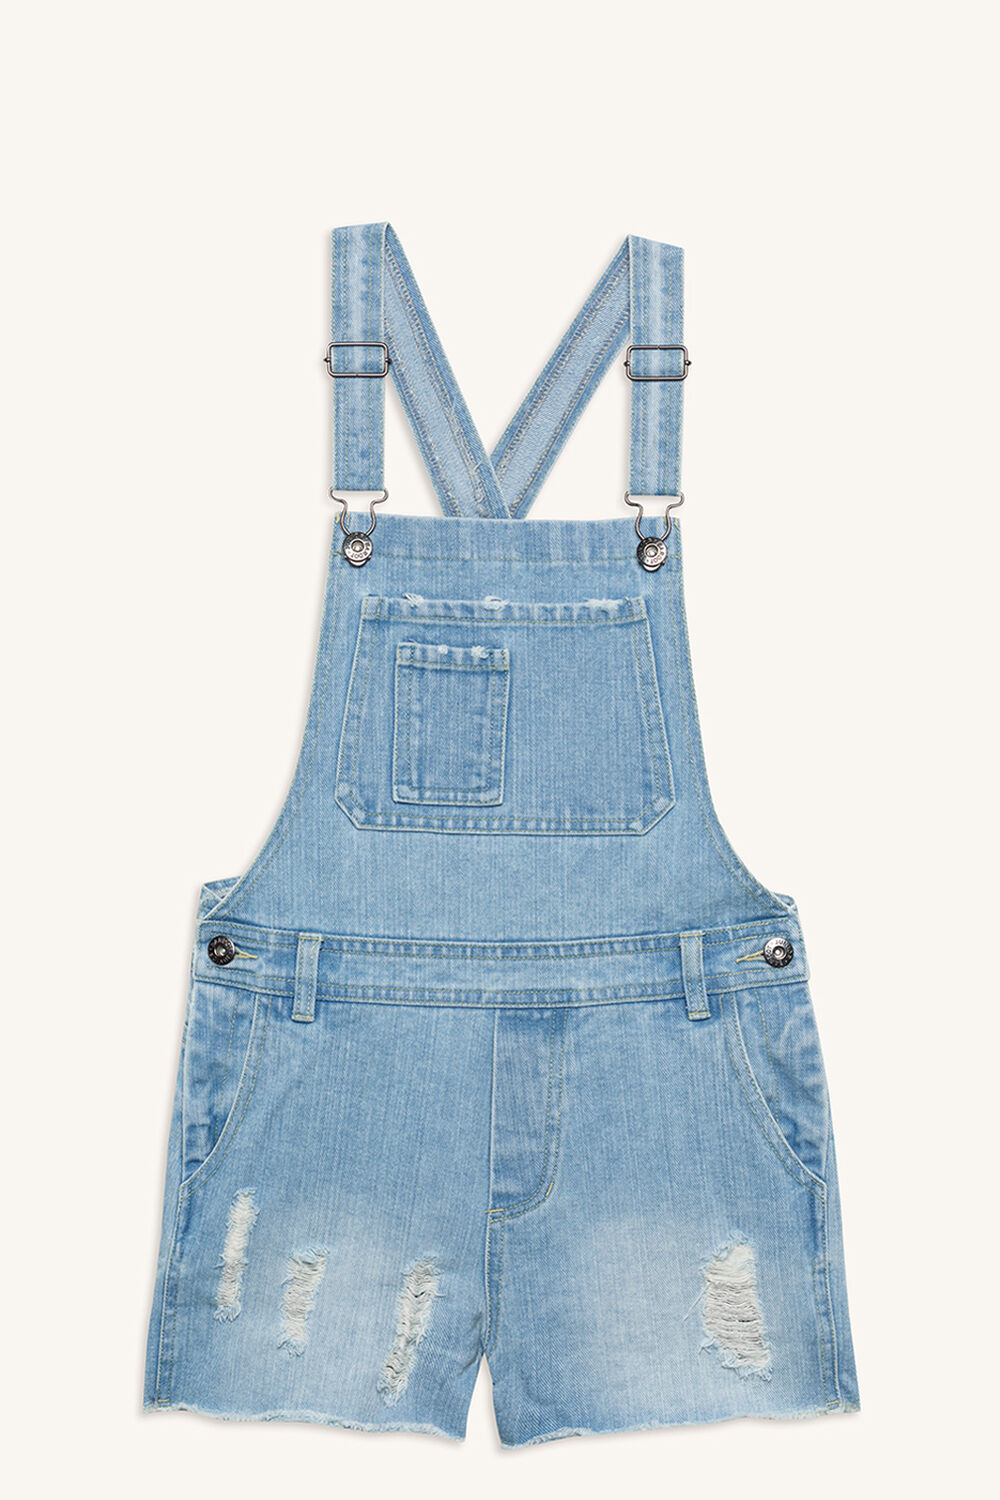 Trash Dungaree Overall | Tween Girls 7-16 Playsuits & Jumpsuits ...